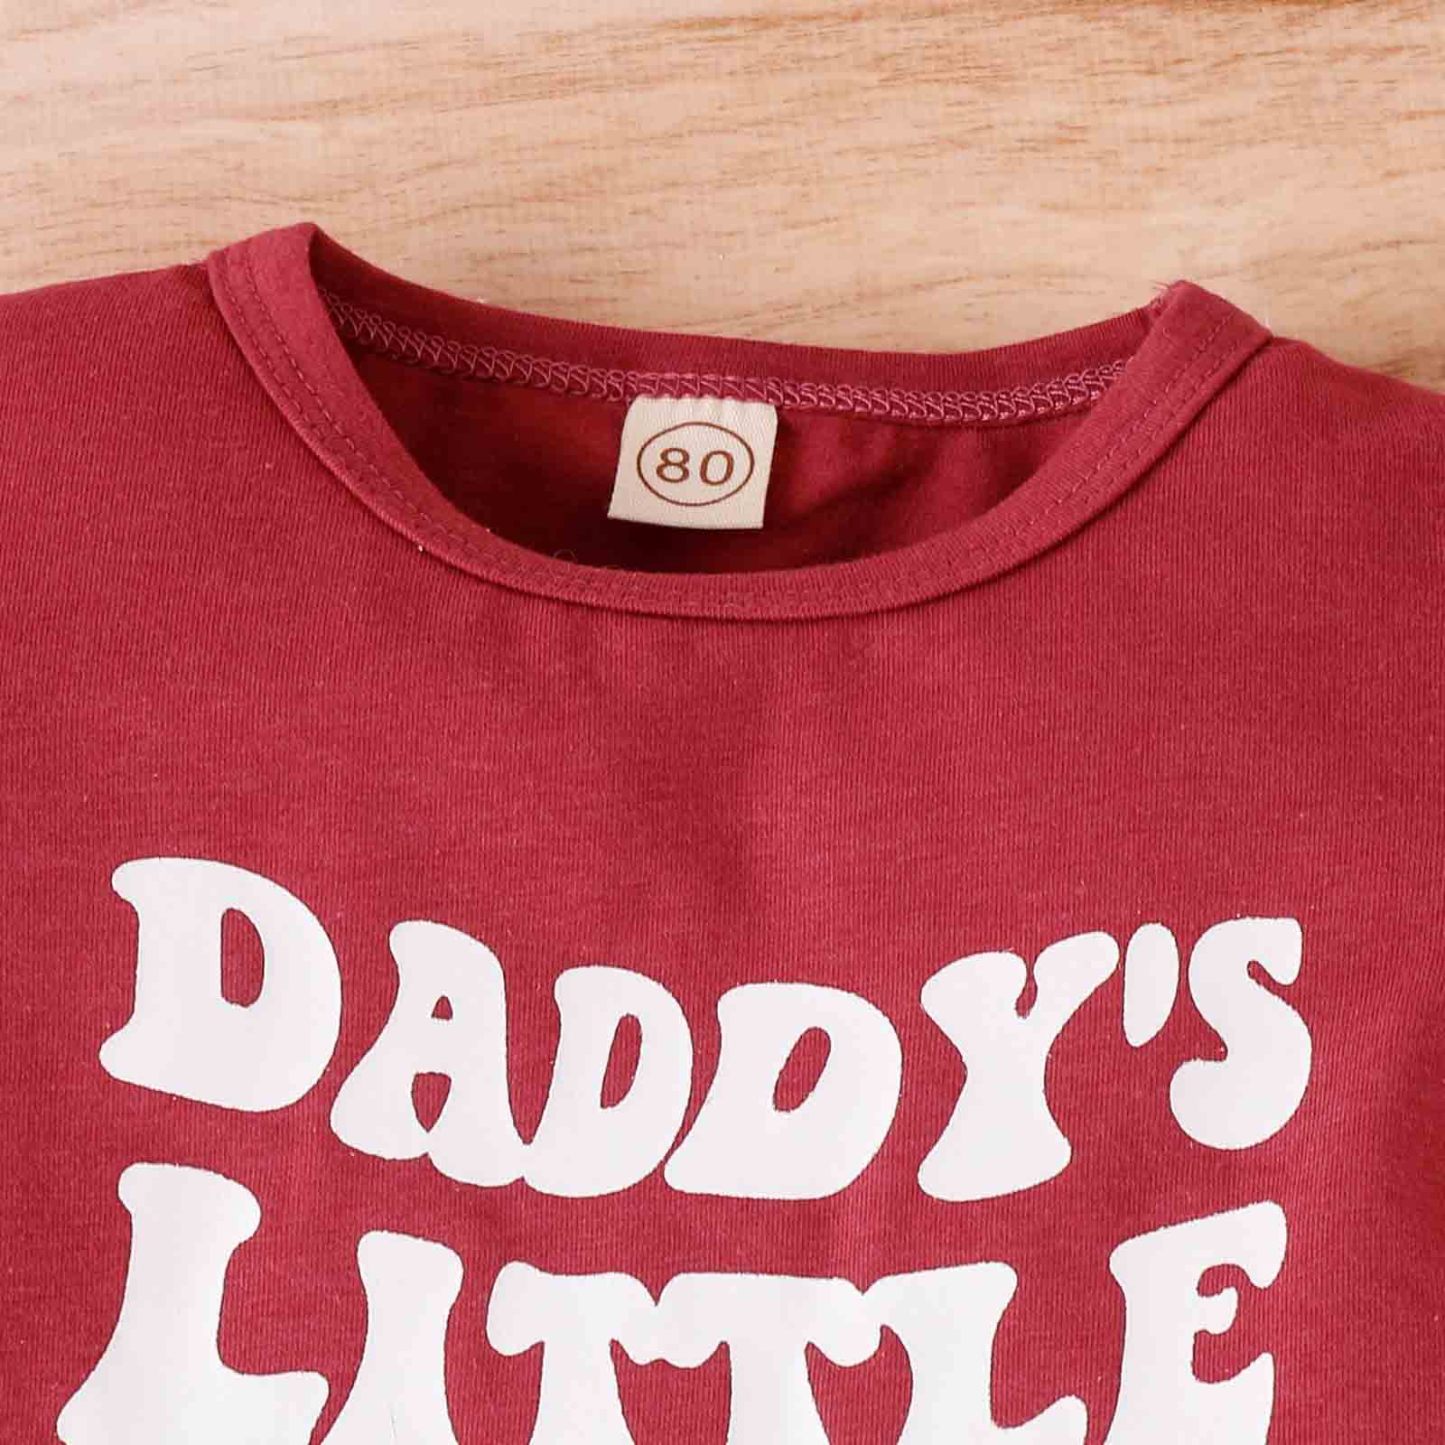 Daddy's Little Cowgirl Sets